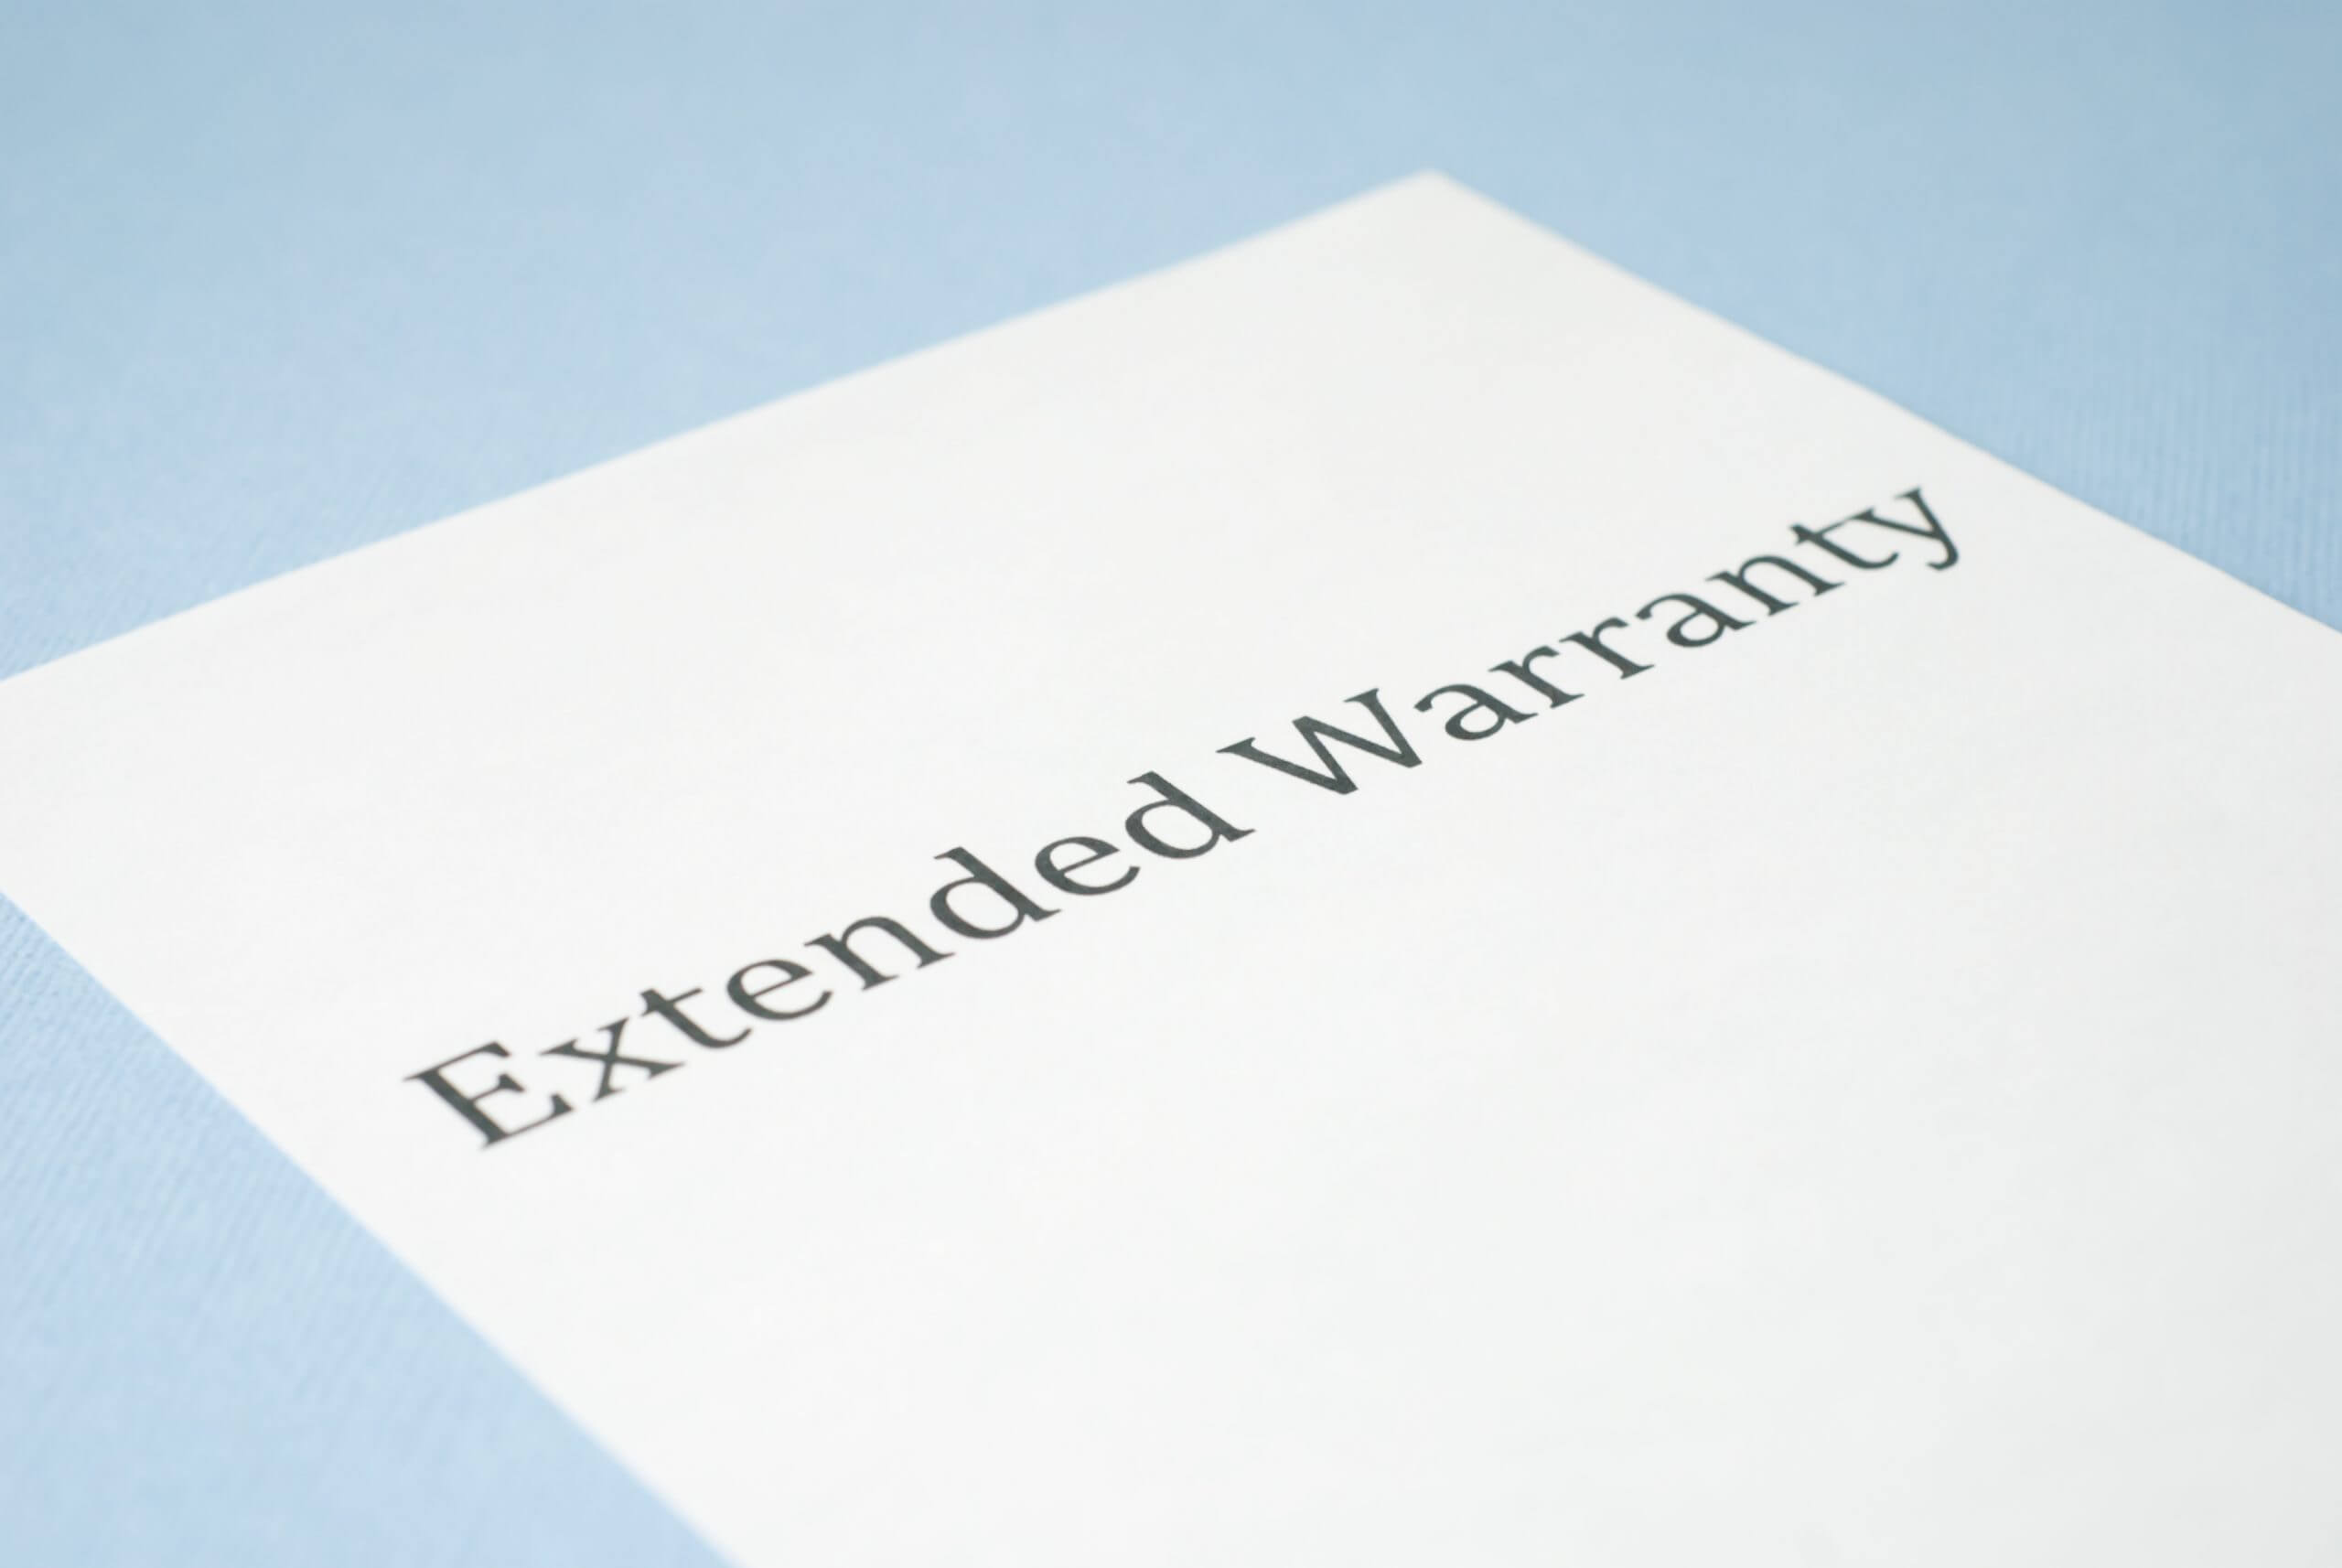 extended warranty printed on a paper